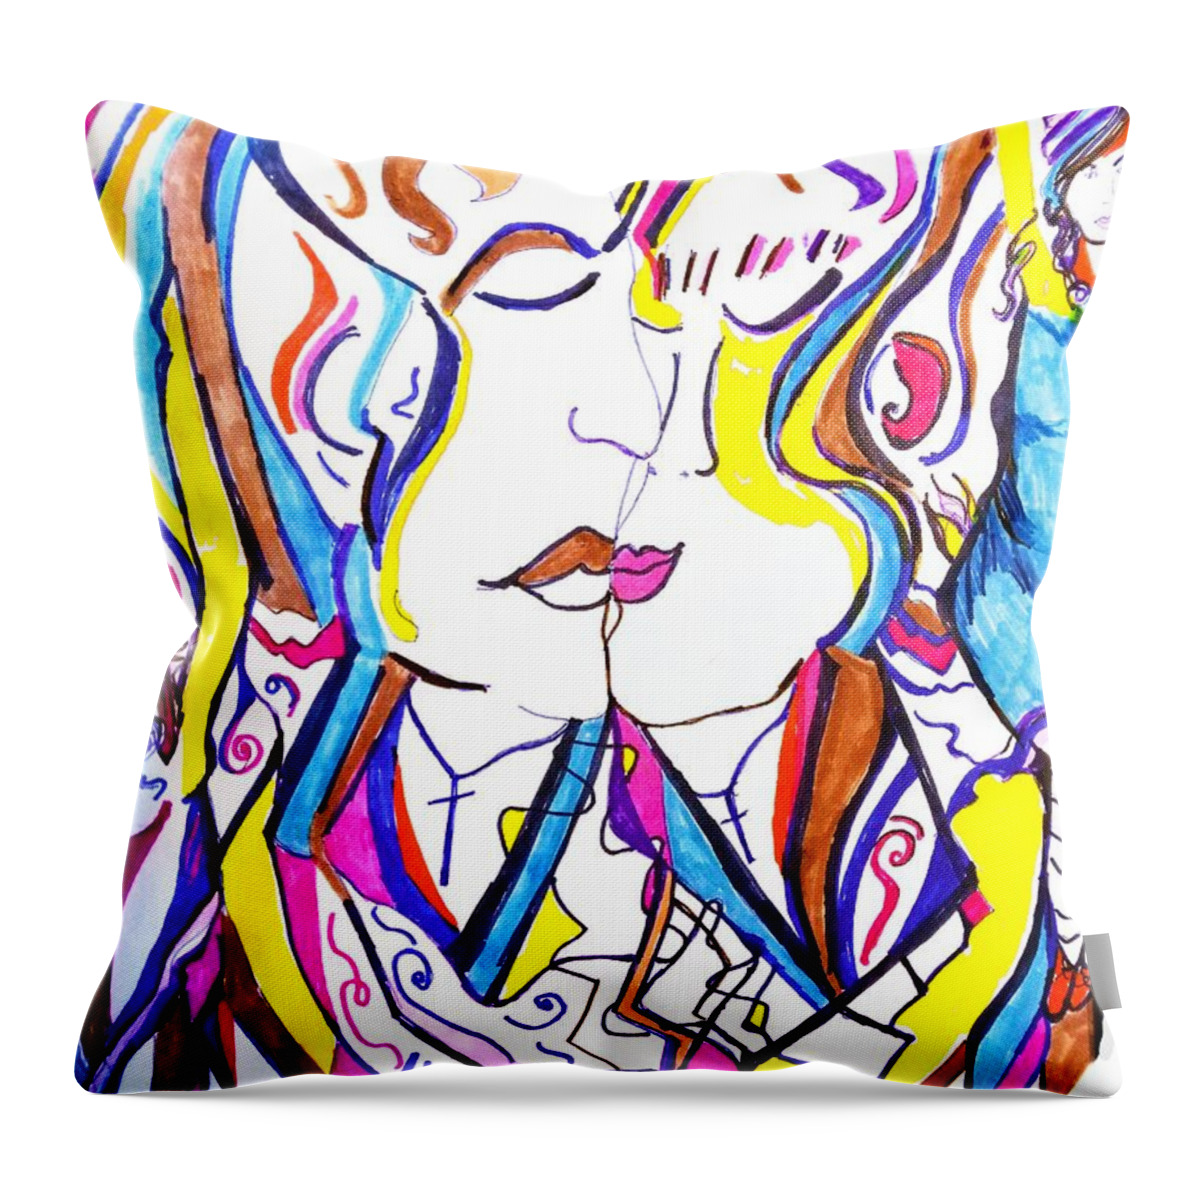 Portrait Throw Pillow featuring the painting Mutual Integrity by Dawn Caravetta Fisher